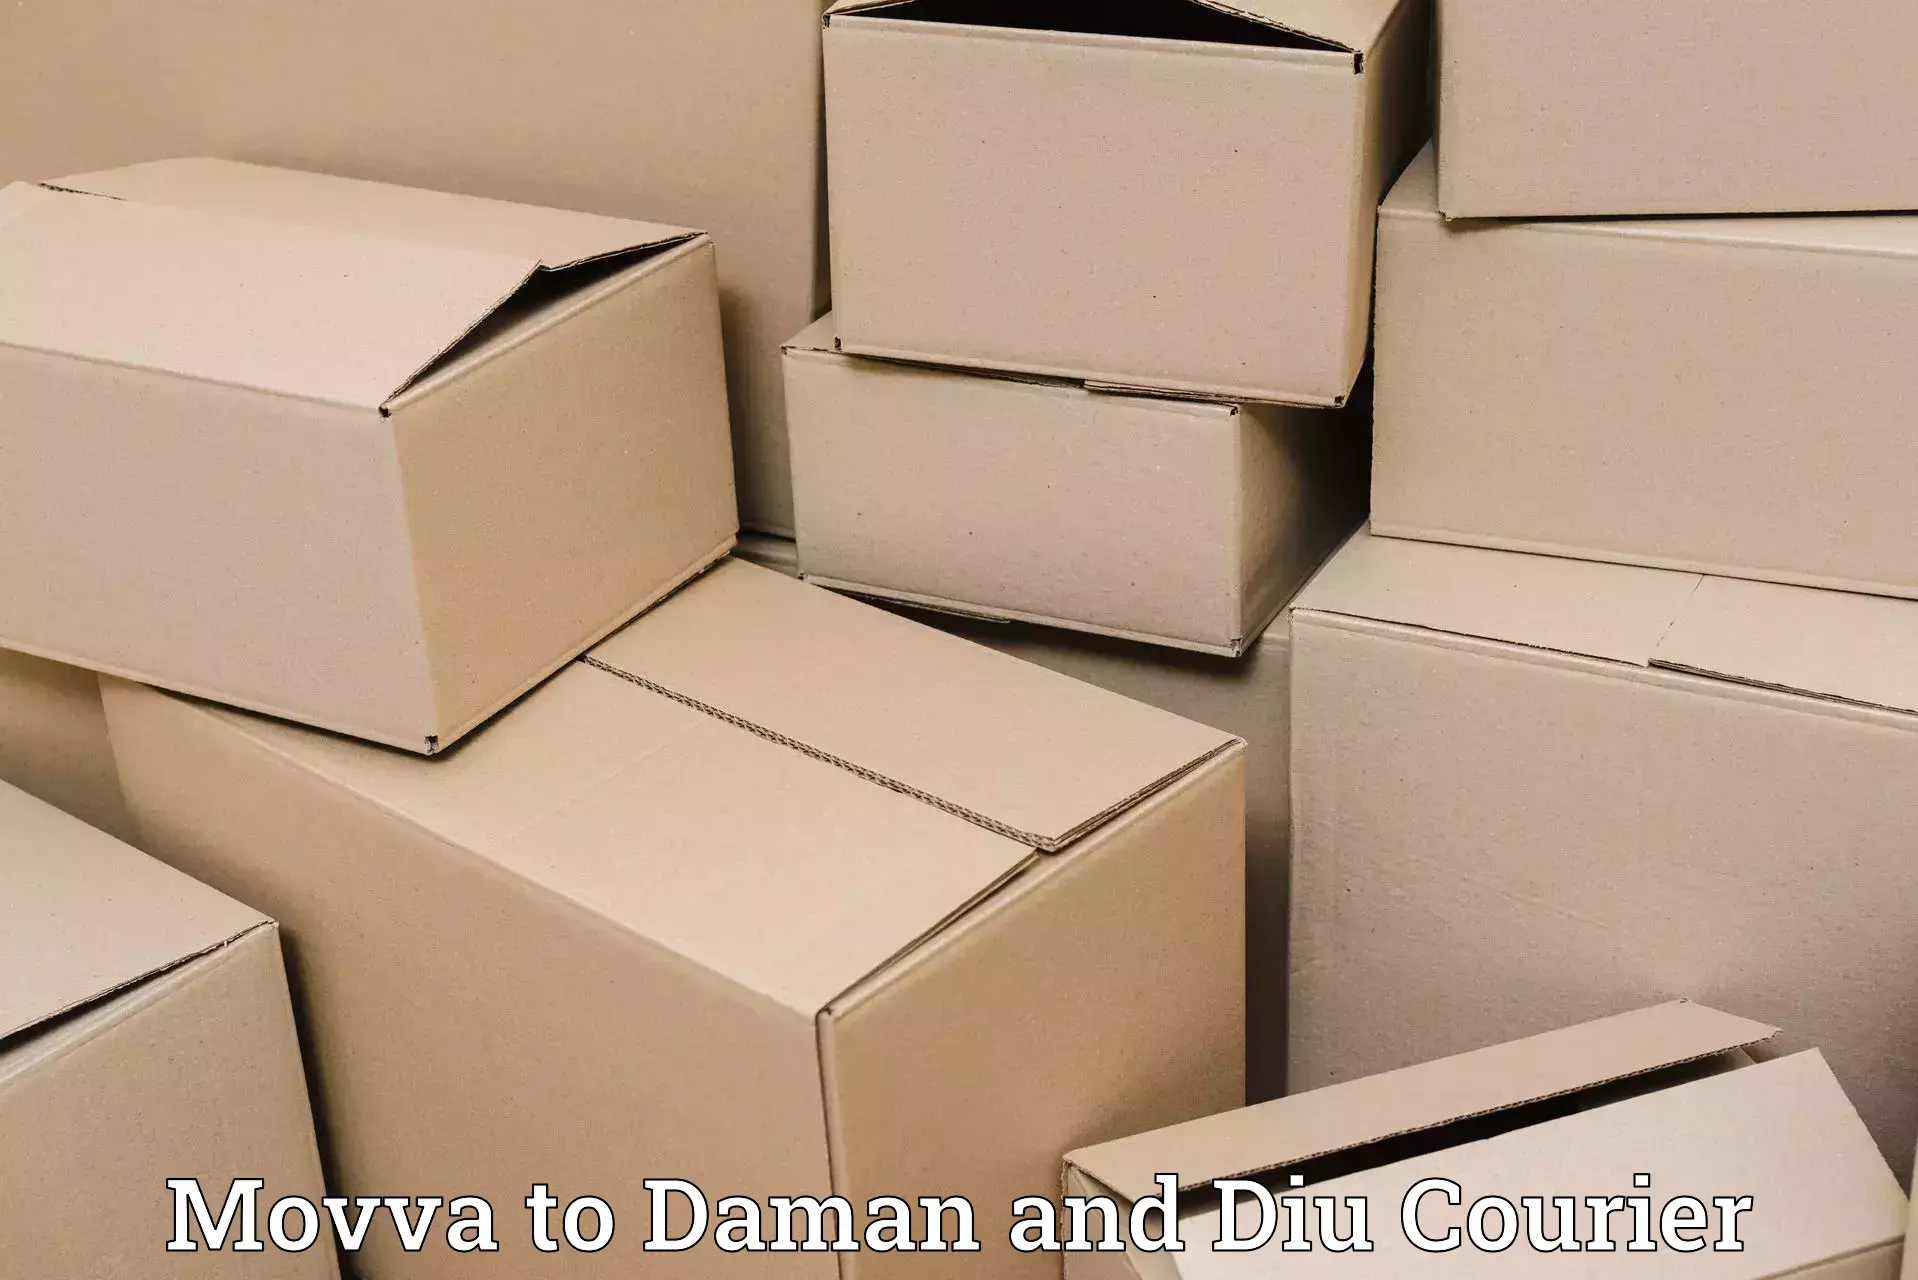 Nationwide courier service Movva to Daman